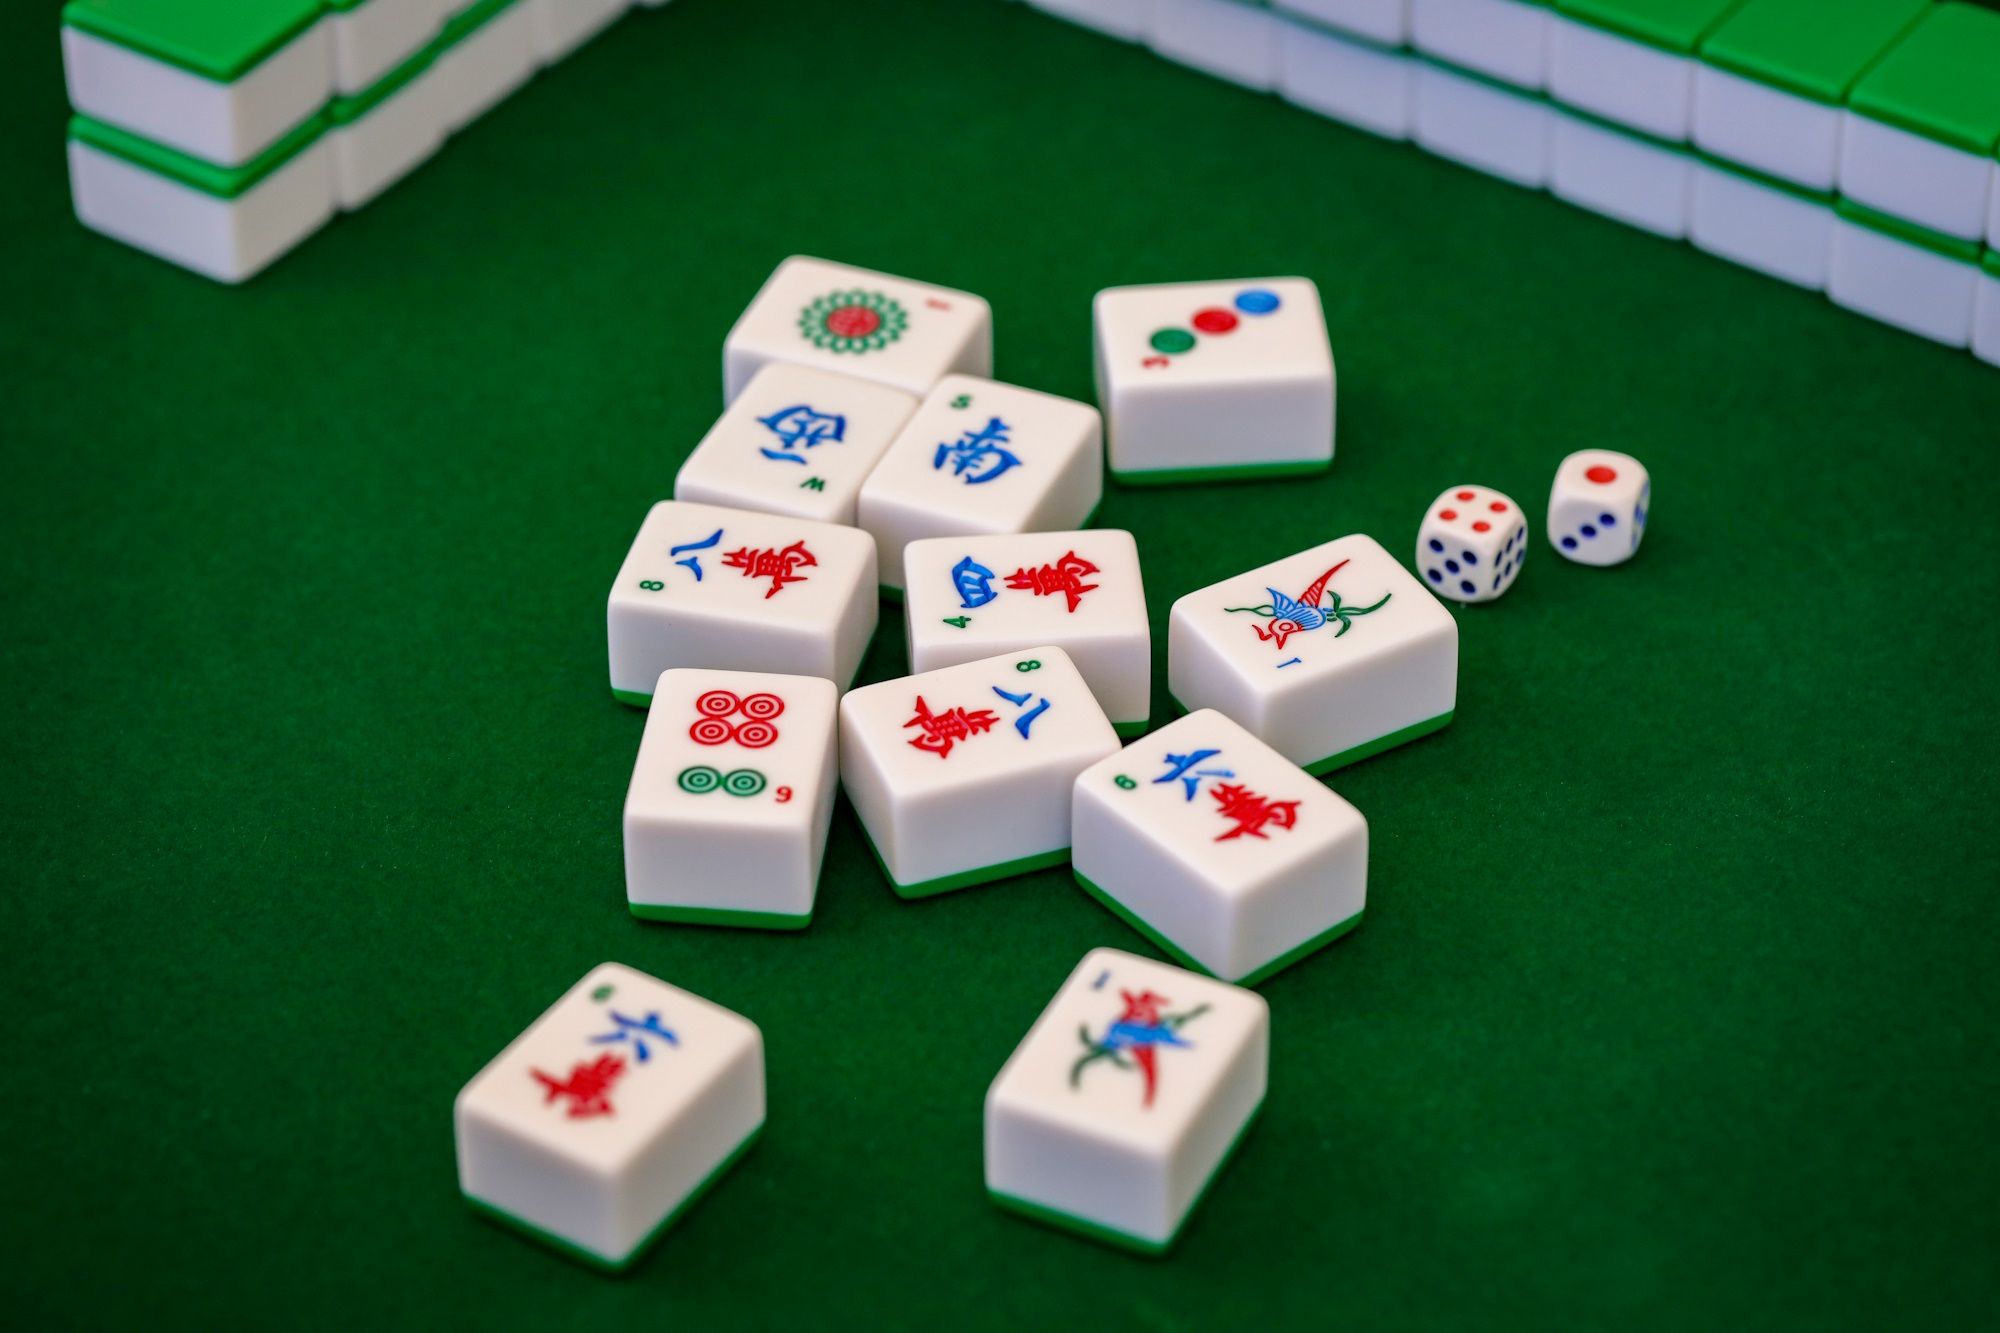 mahjong tiles placed in a pile at the center of green table